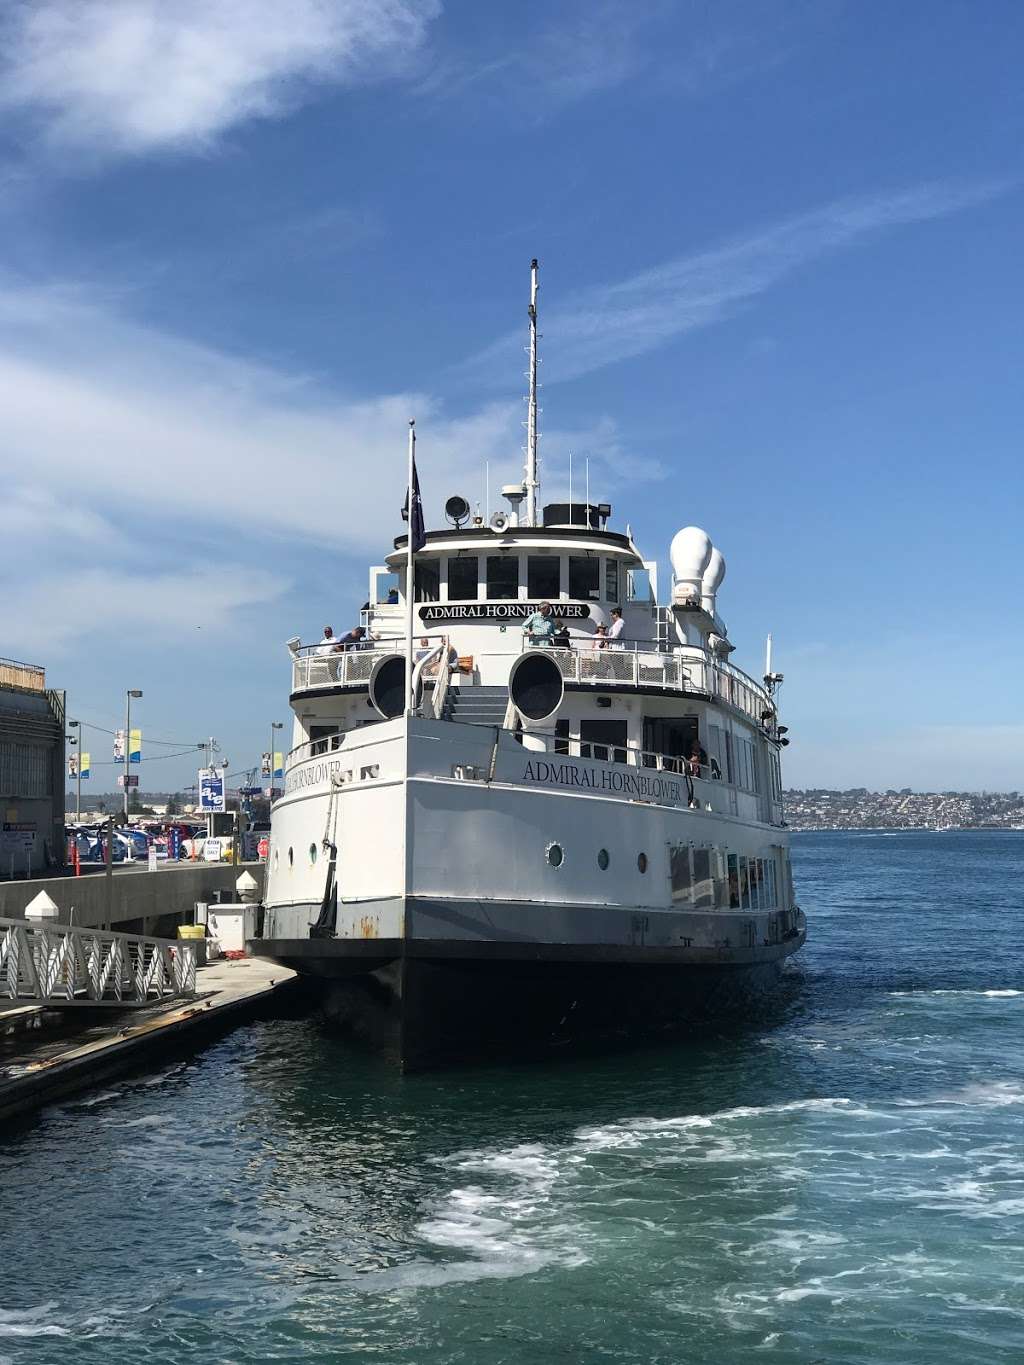 Hornblower Cruises & Events (Whale Watching & Harbor Tours) | 970 N Harbor Dr, San Diego, CA 92101 | Phone: (619) 686-8715